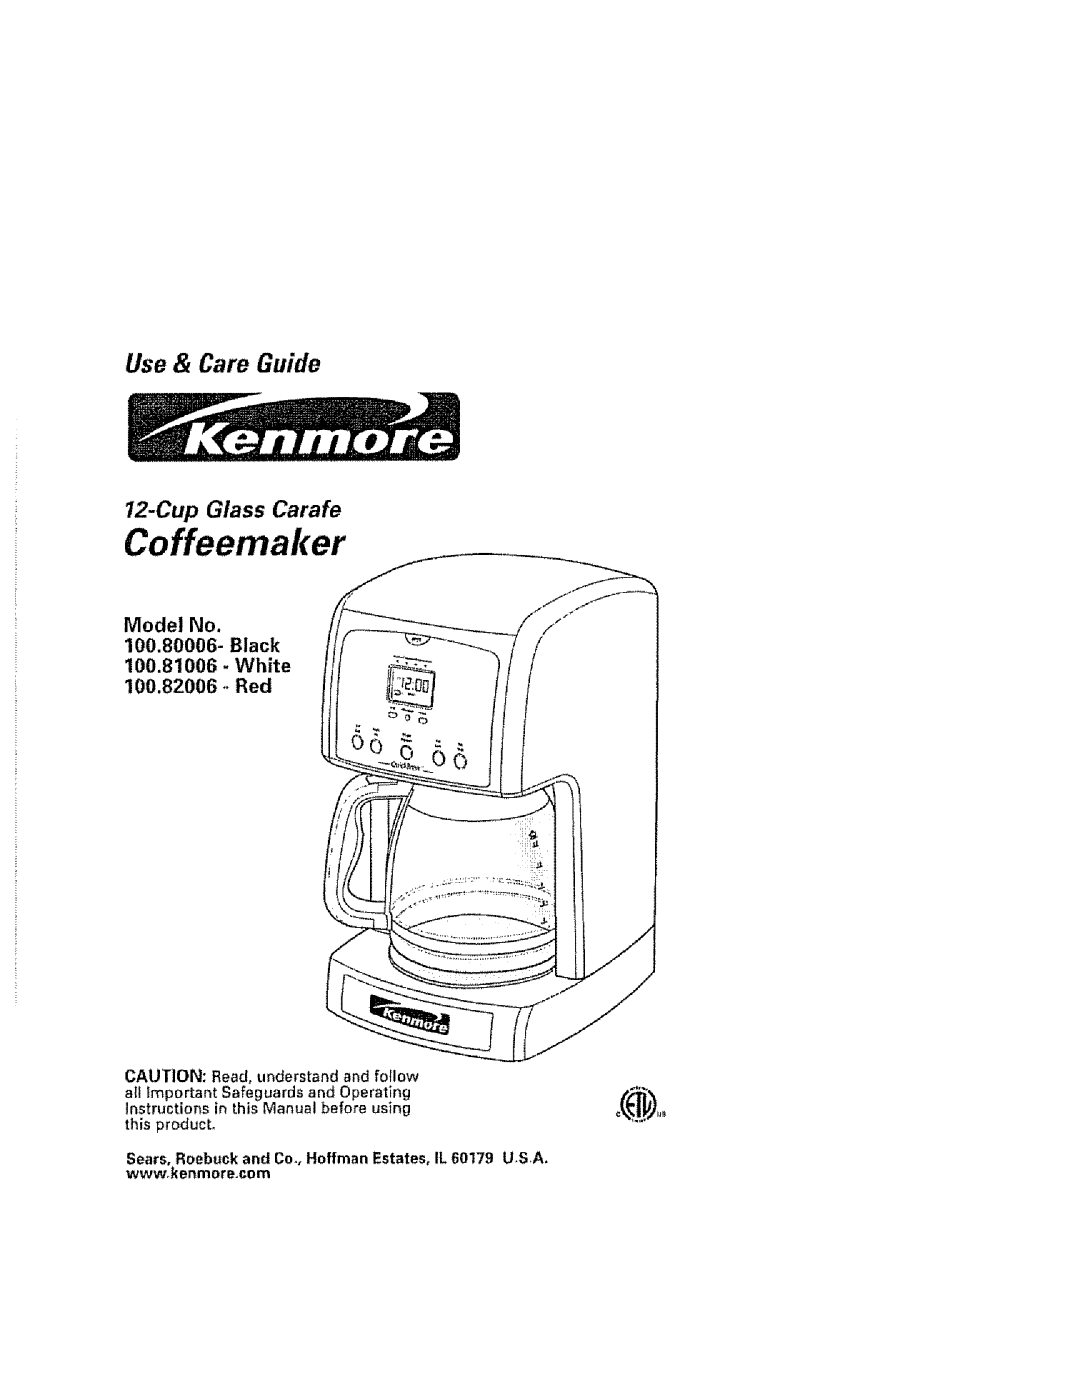 Kenmore manual Coffeemaker, Use & Care Guide, Cup Glass Carafe, Model No 100.80006- Black 100.81006 - White, Red 